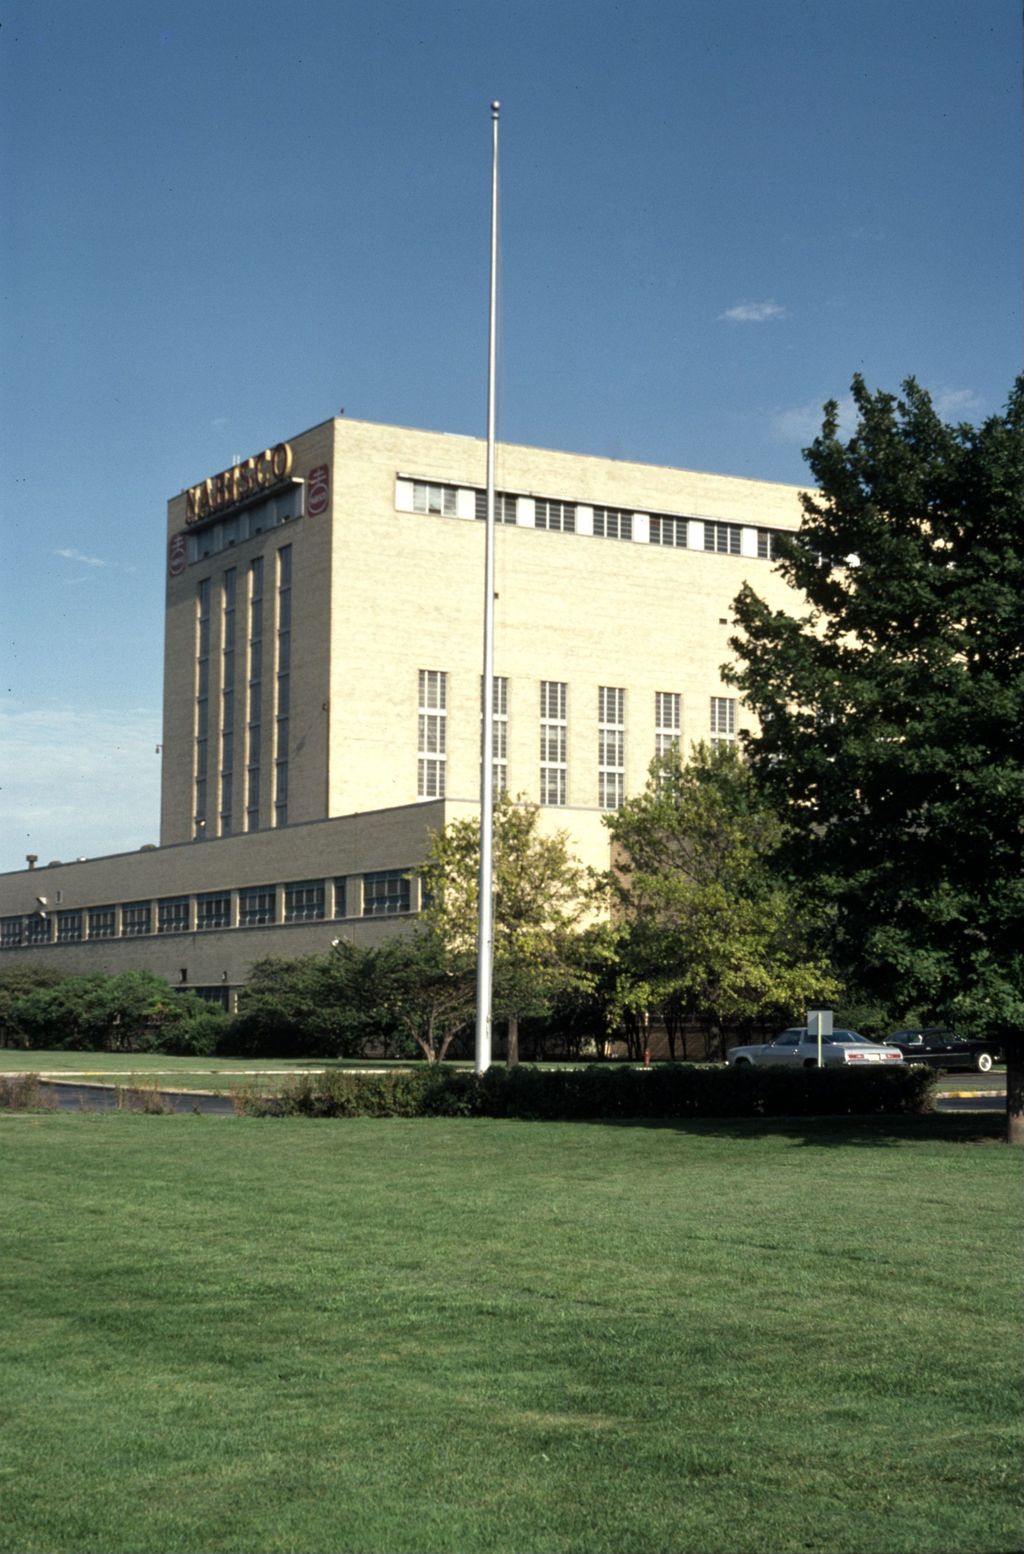 Nabisco Biscuit Company plant